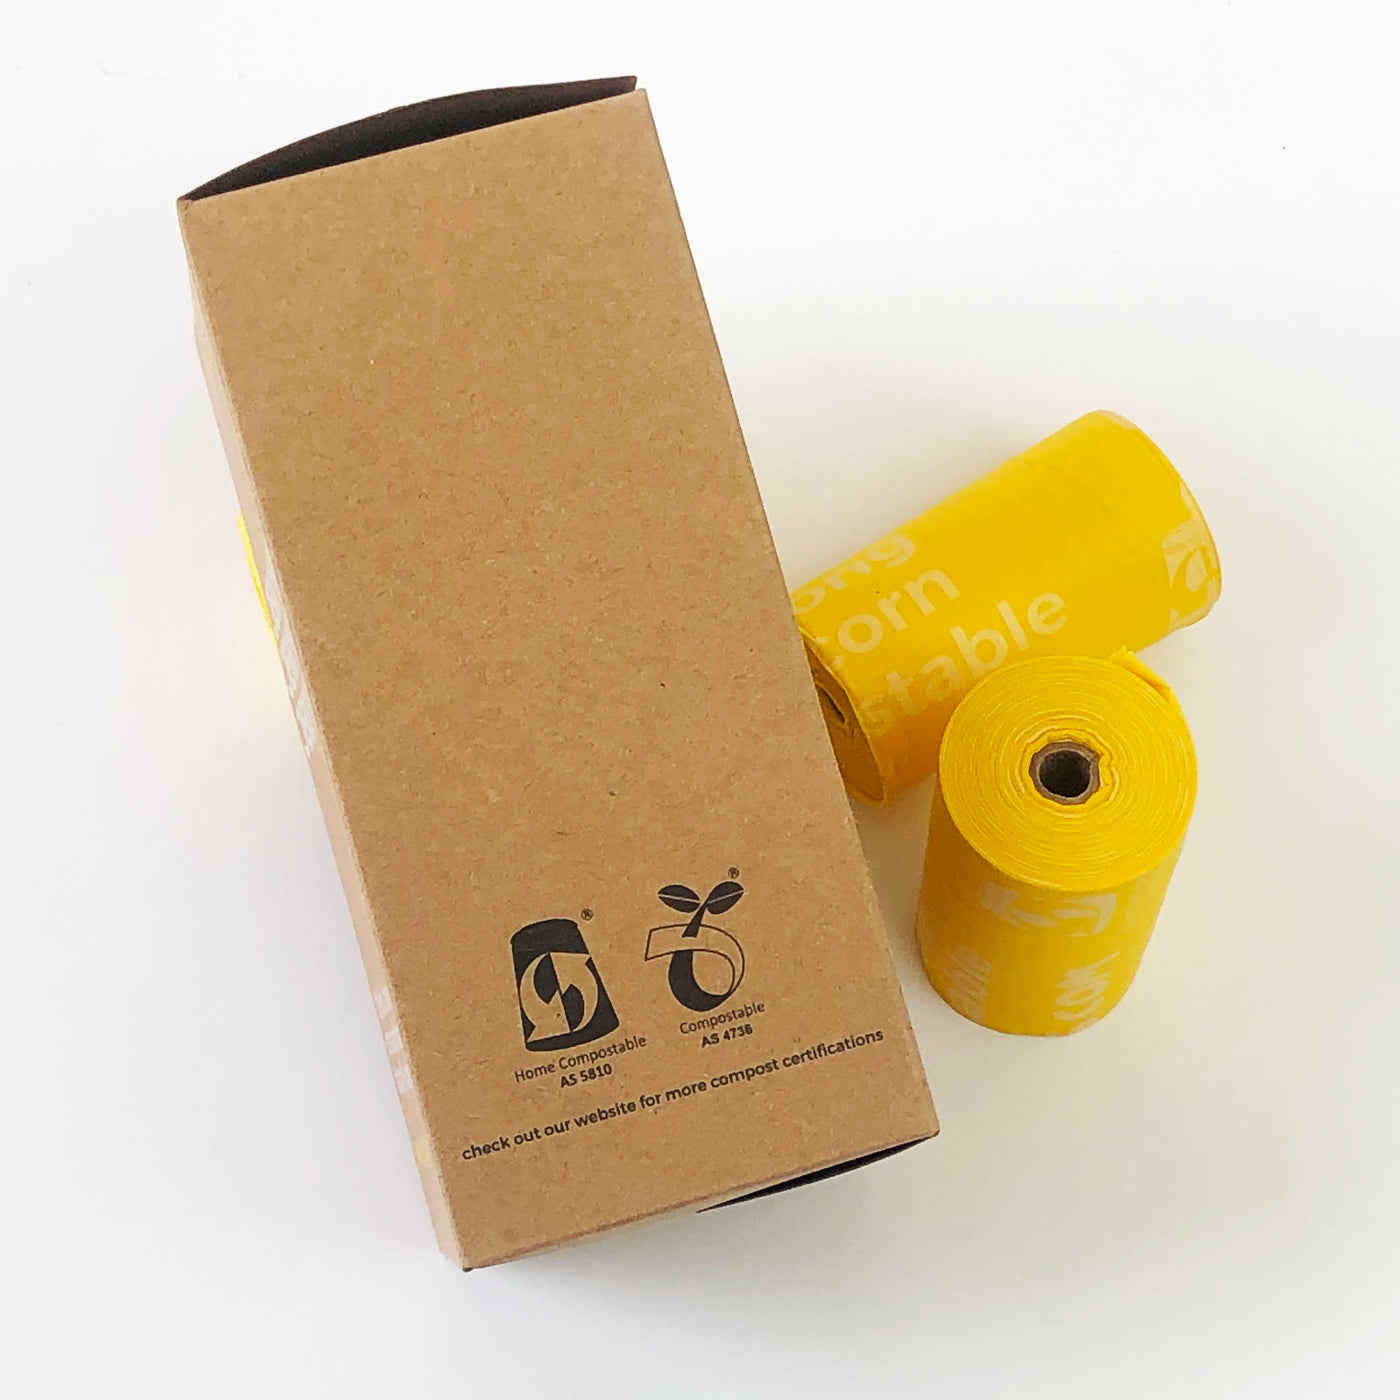 jerry bags compostable poop bags side view yellow rolls